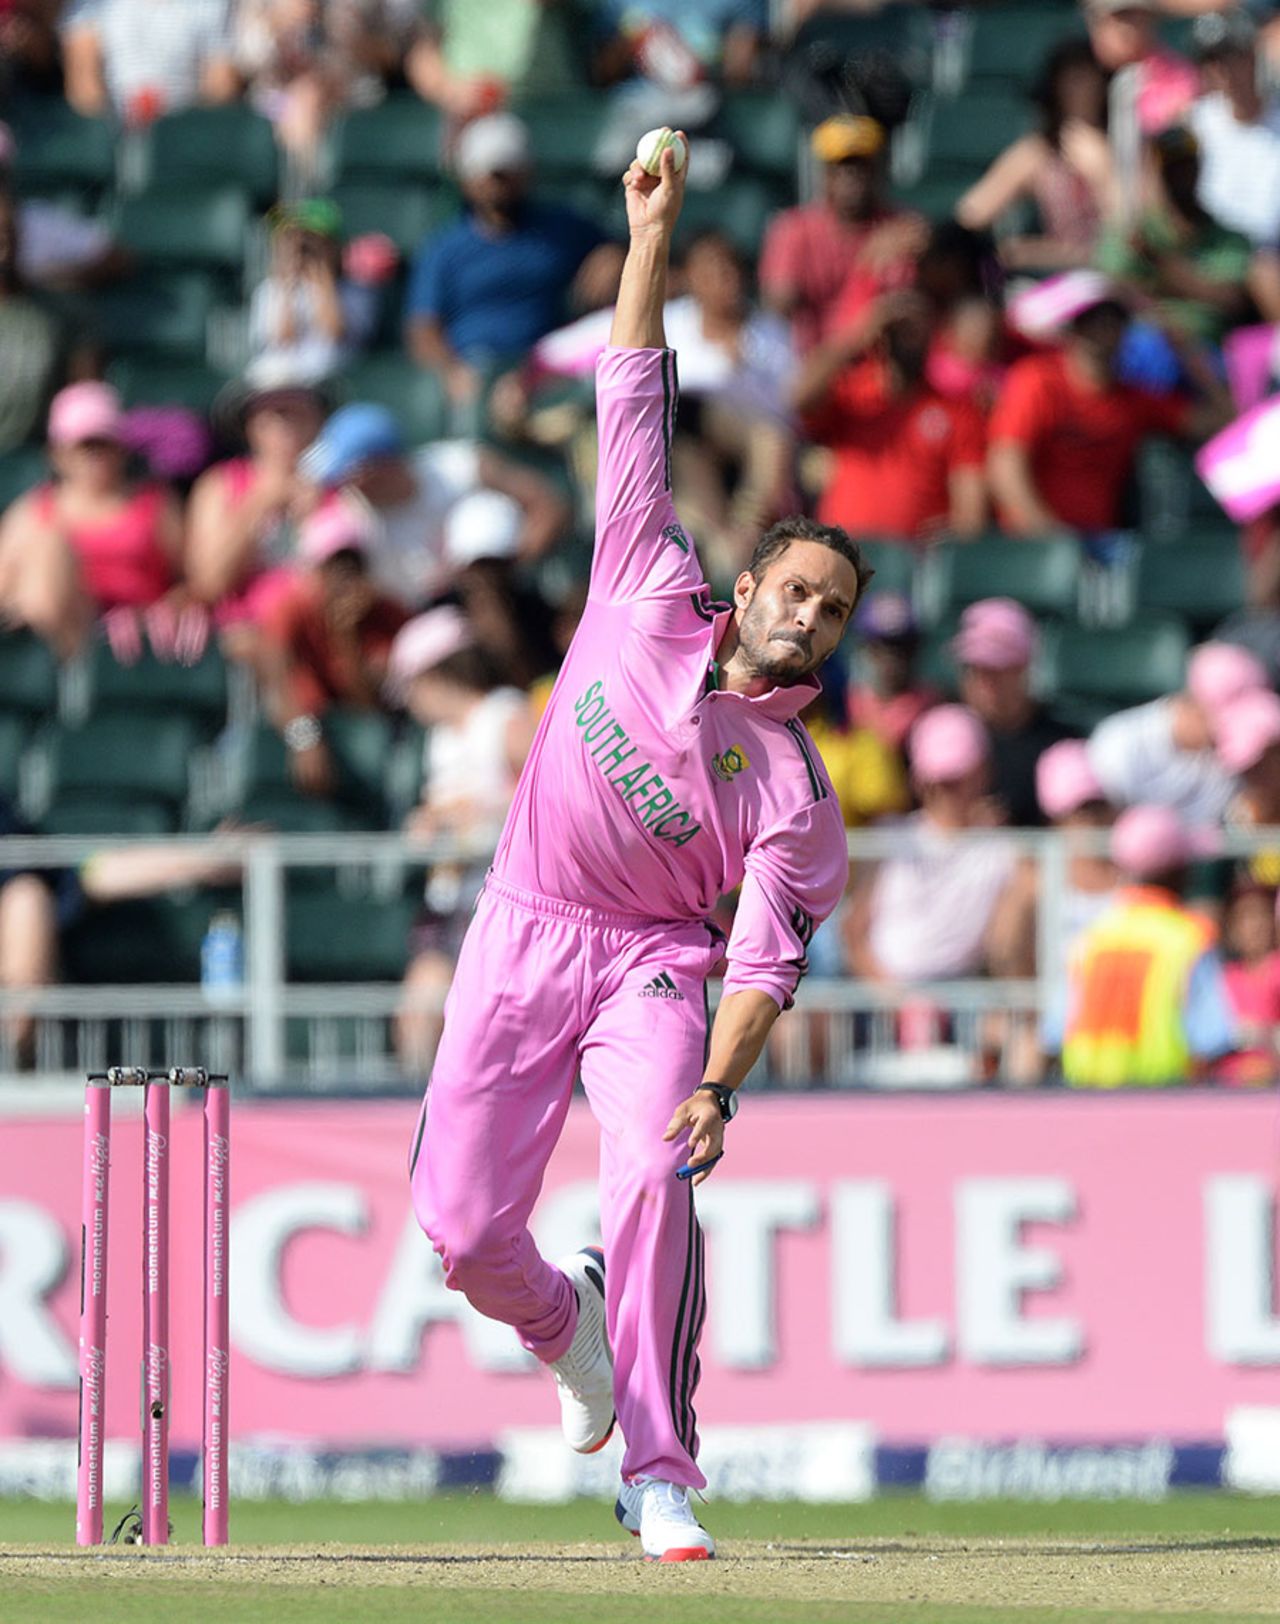 Farhaan Behardien picked up the wicket of Dwyane Smith, South Africa v West Indies, 2nd ODI, Johannesburg, January 18, 2015